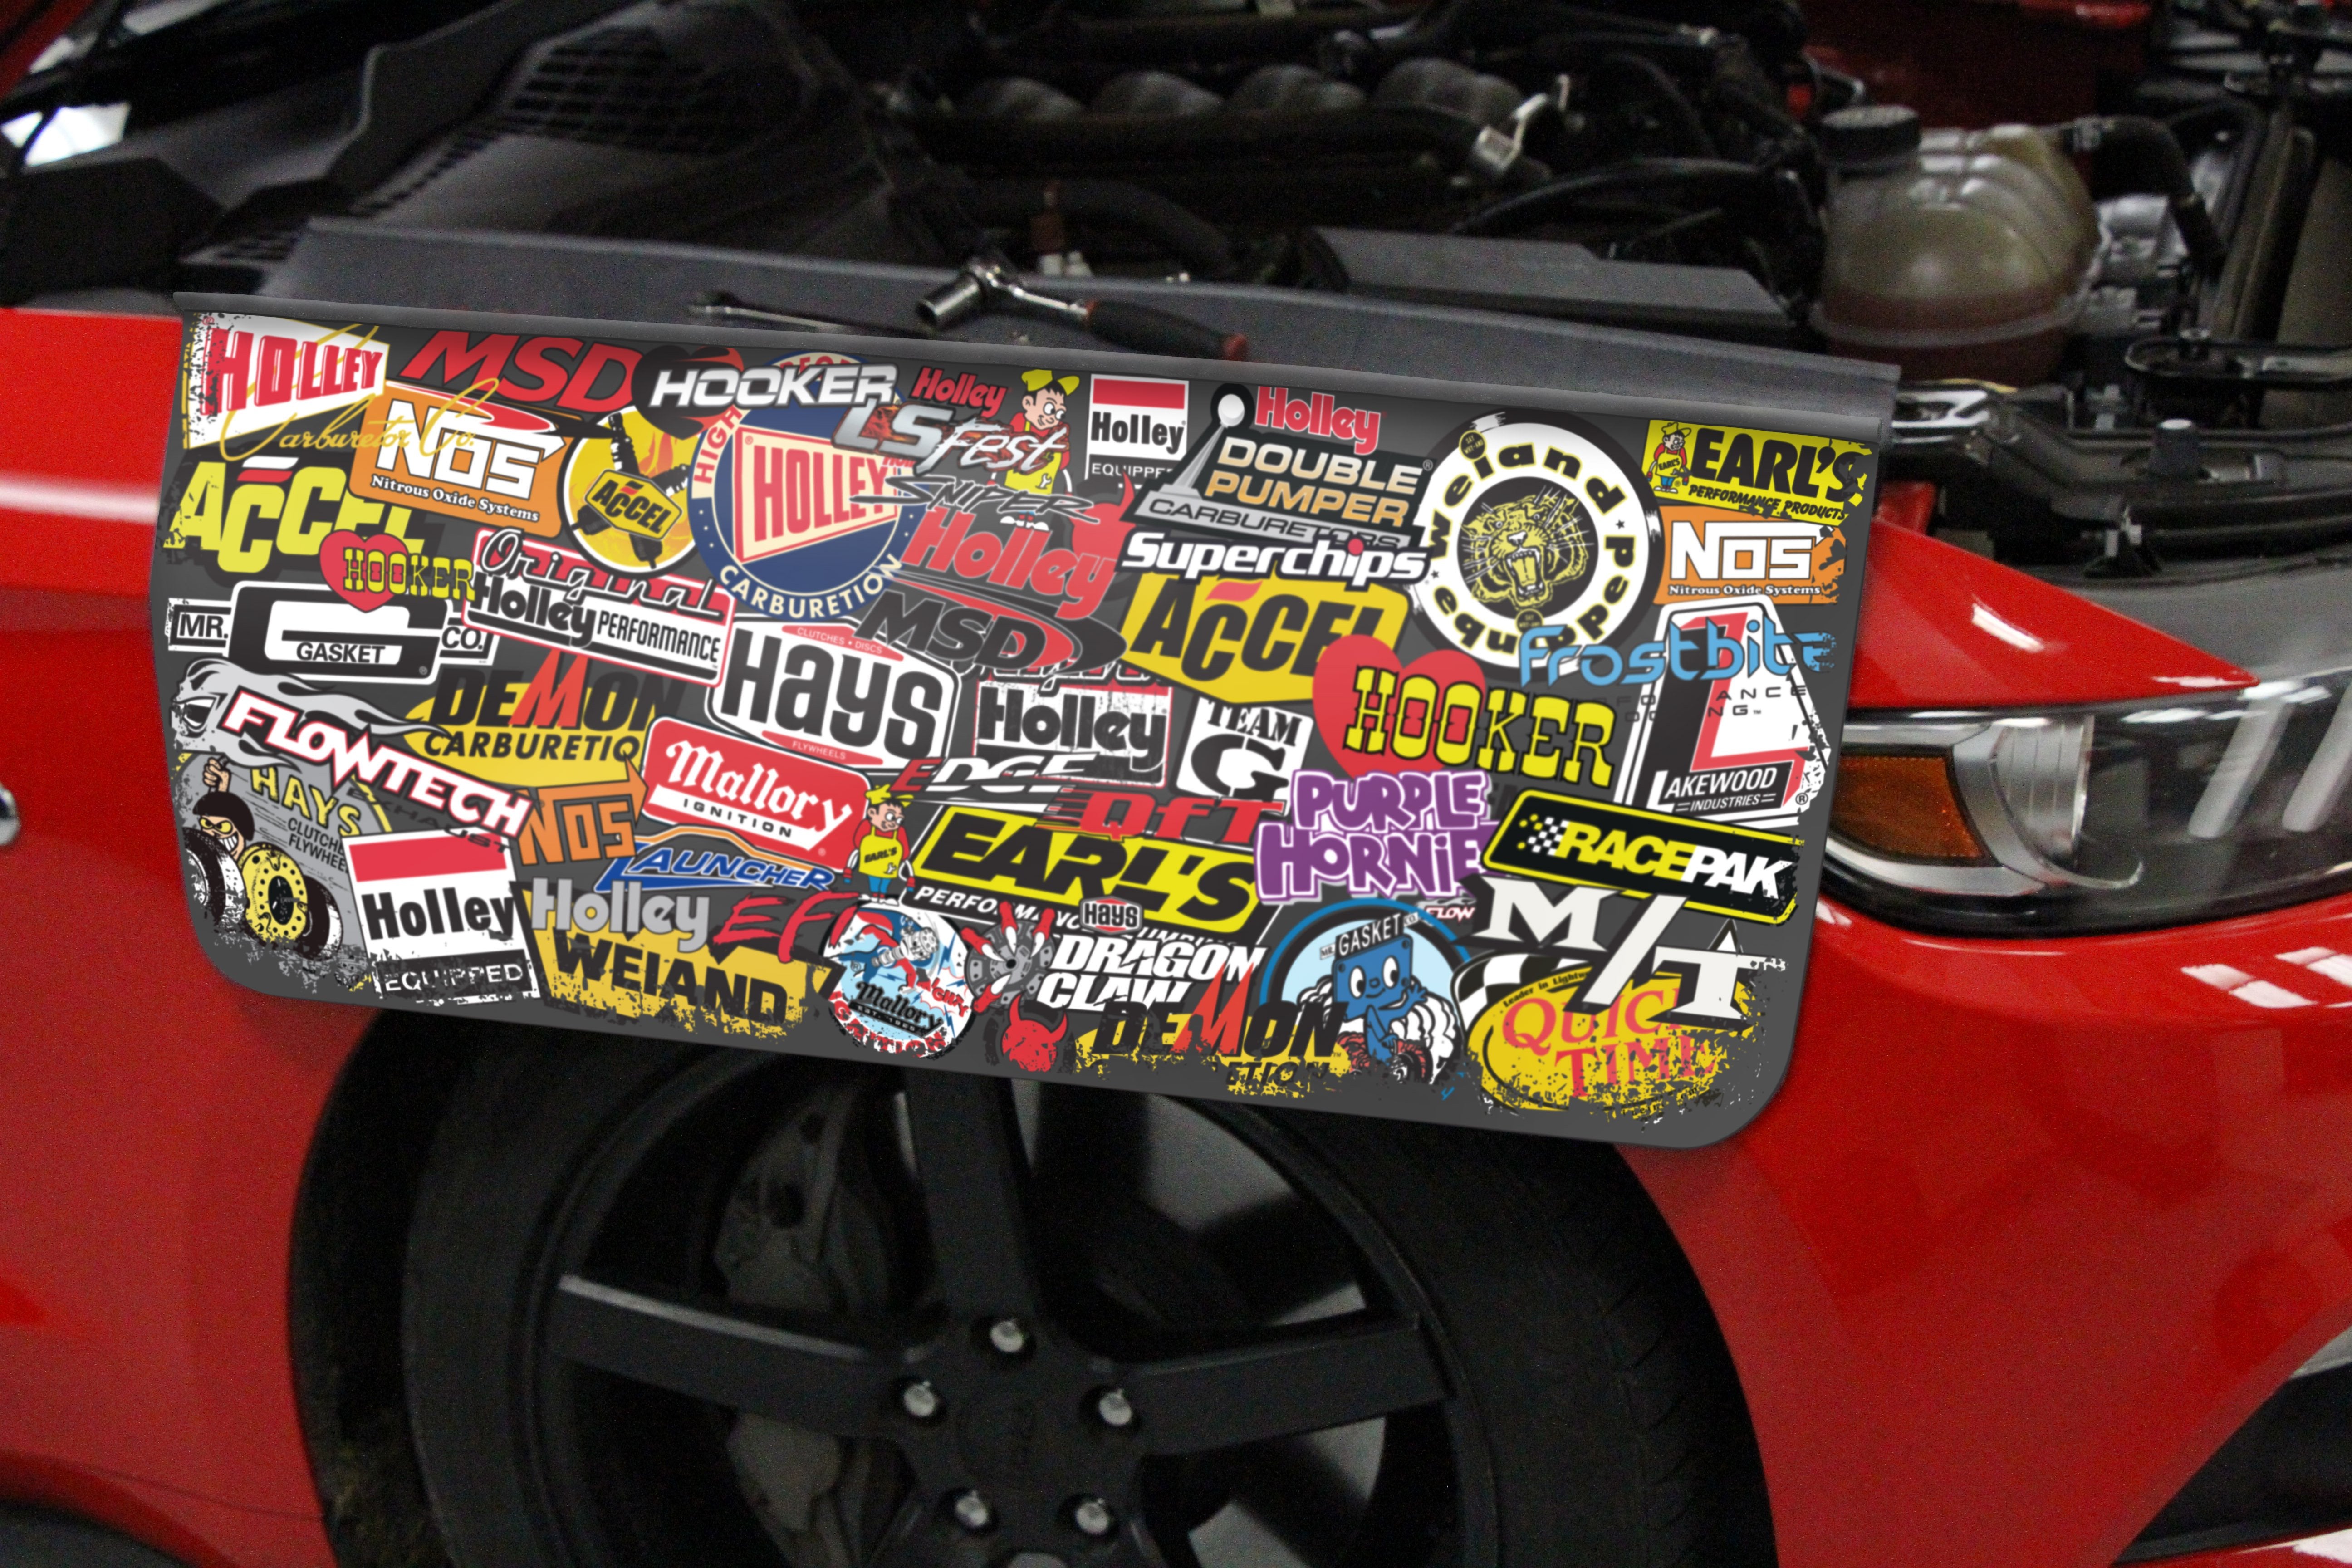 HOLLEY STICKER BOMB FENDER COVER - 36in X 26in 36-445